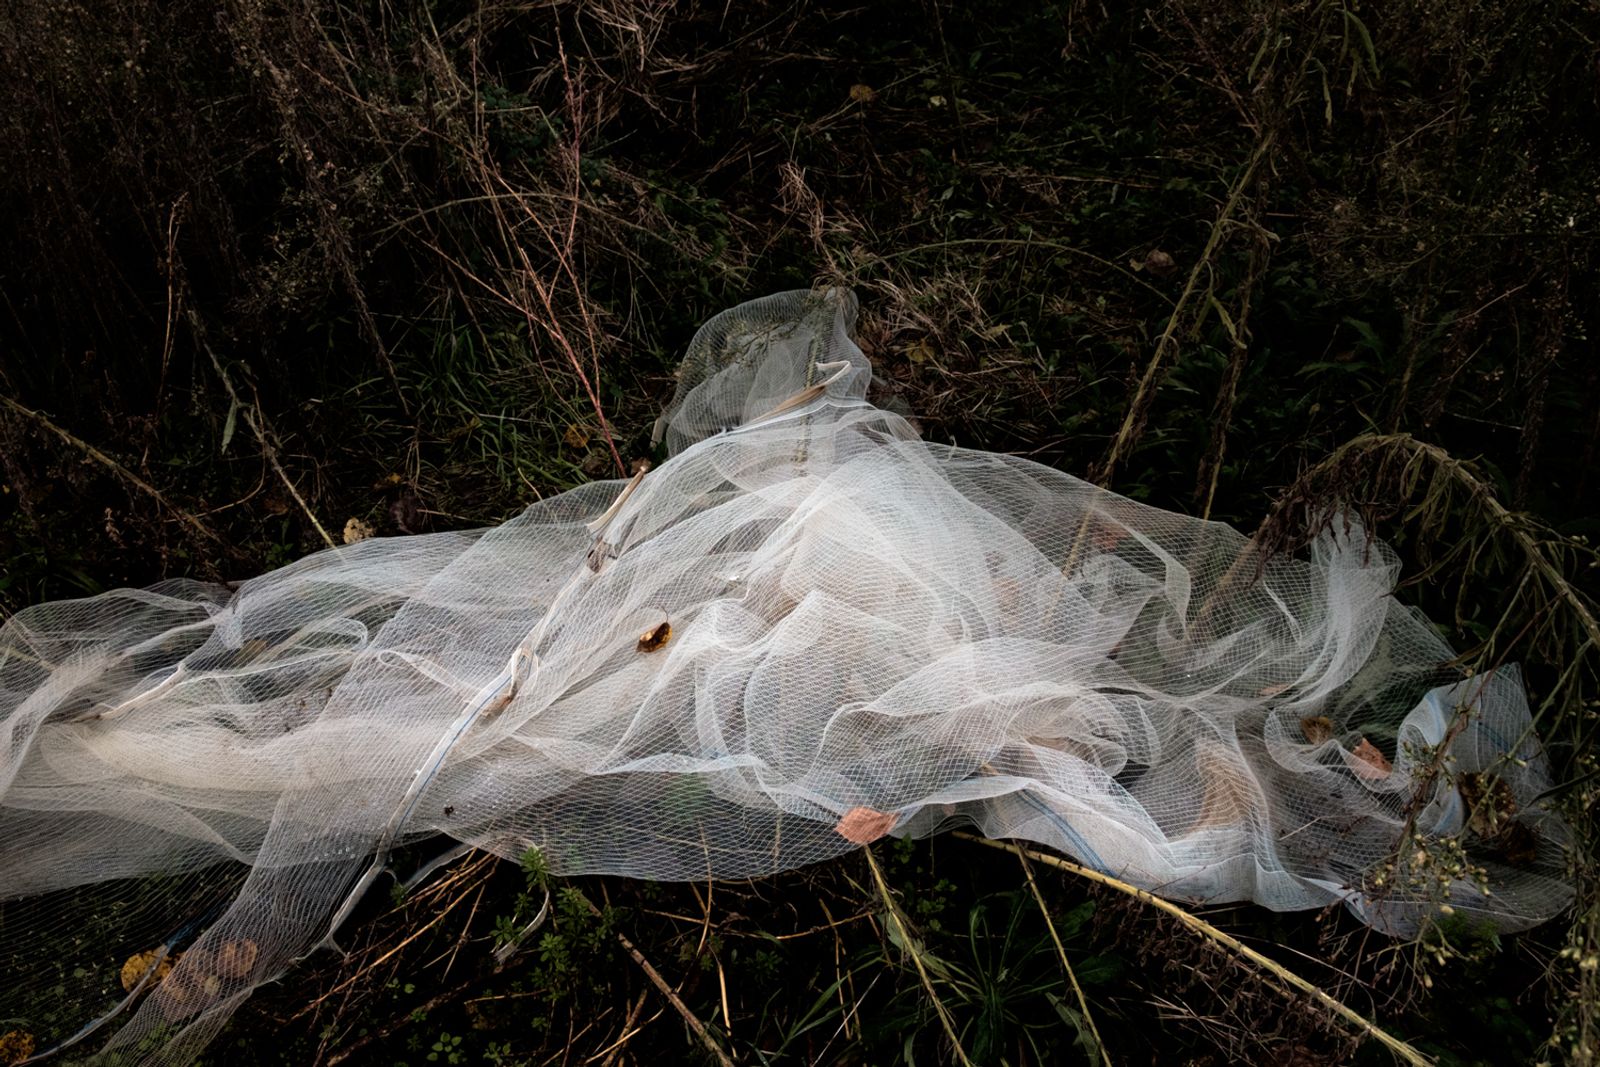 © Claire Power - A net to protect fruit trees from hail lies on the ground after being used